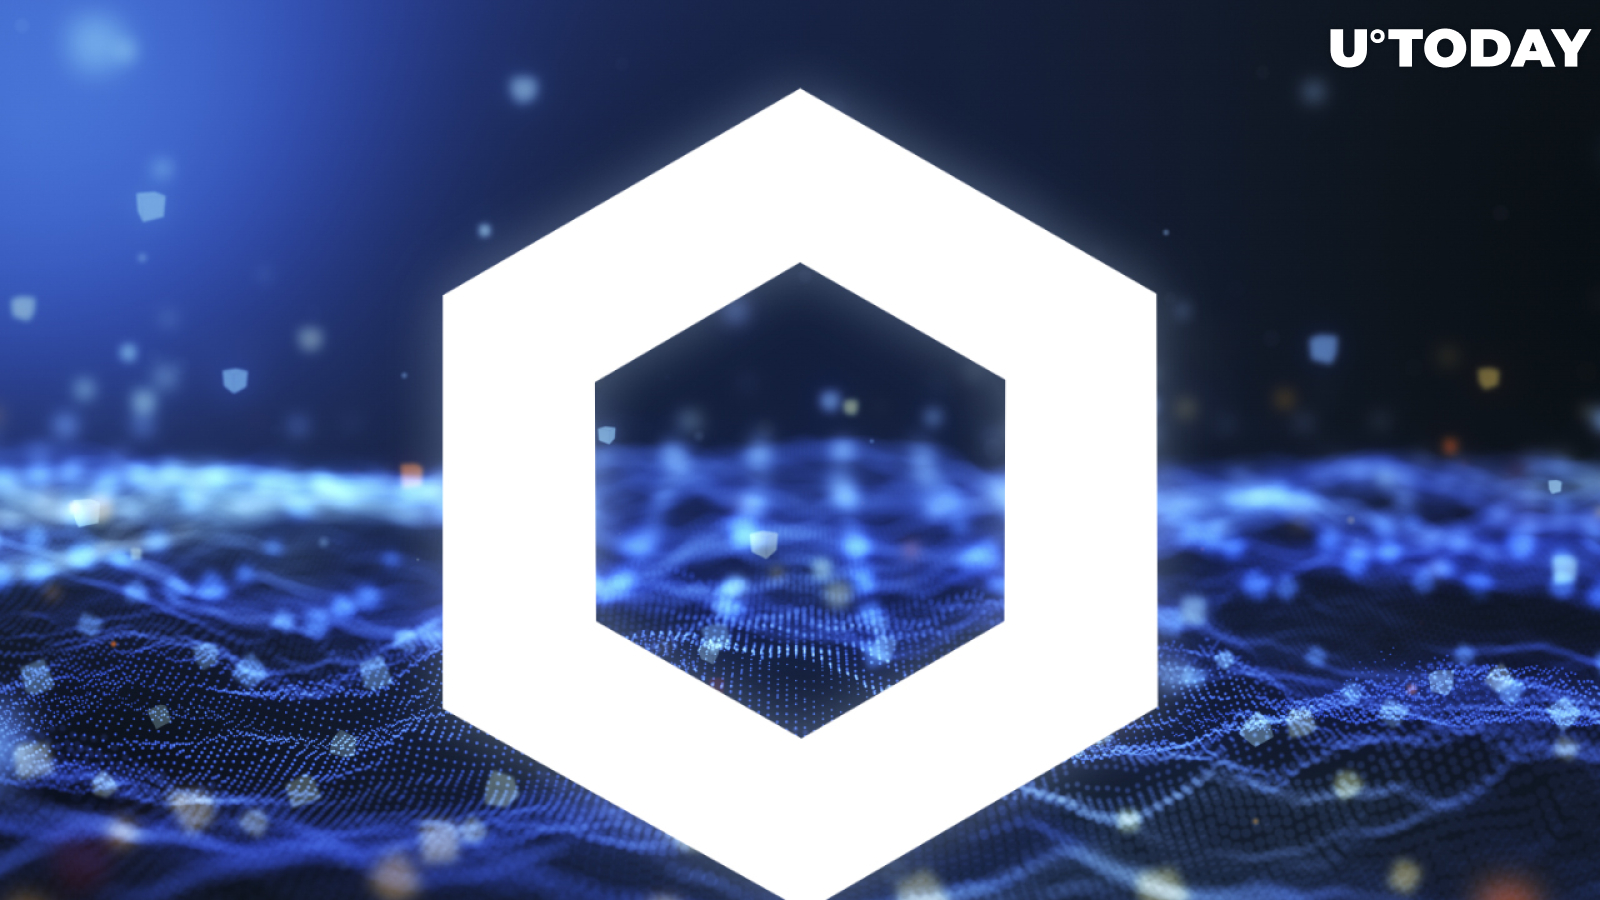 Chainlink's Large Investors Added 3 Million Link Tokens, Leading to 36% Rally